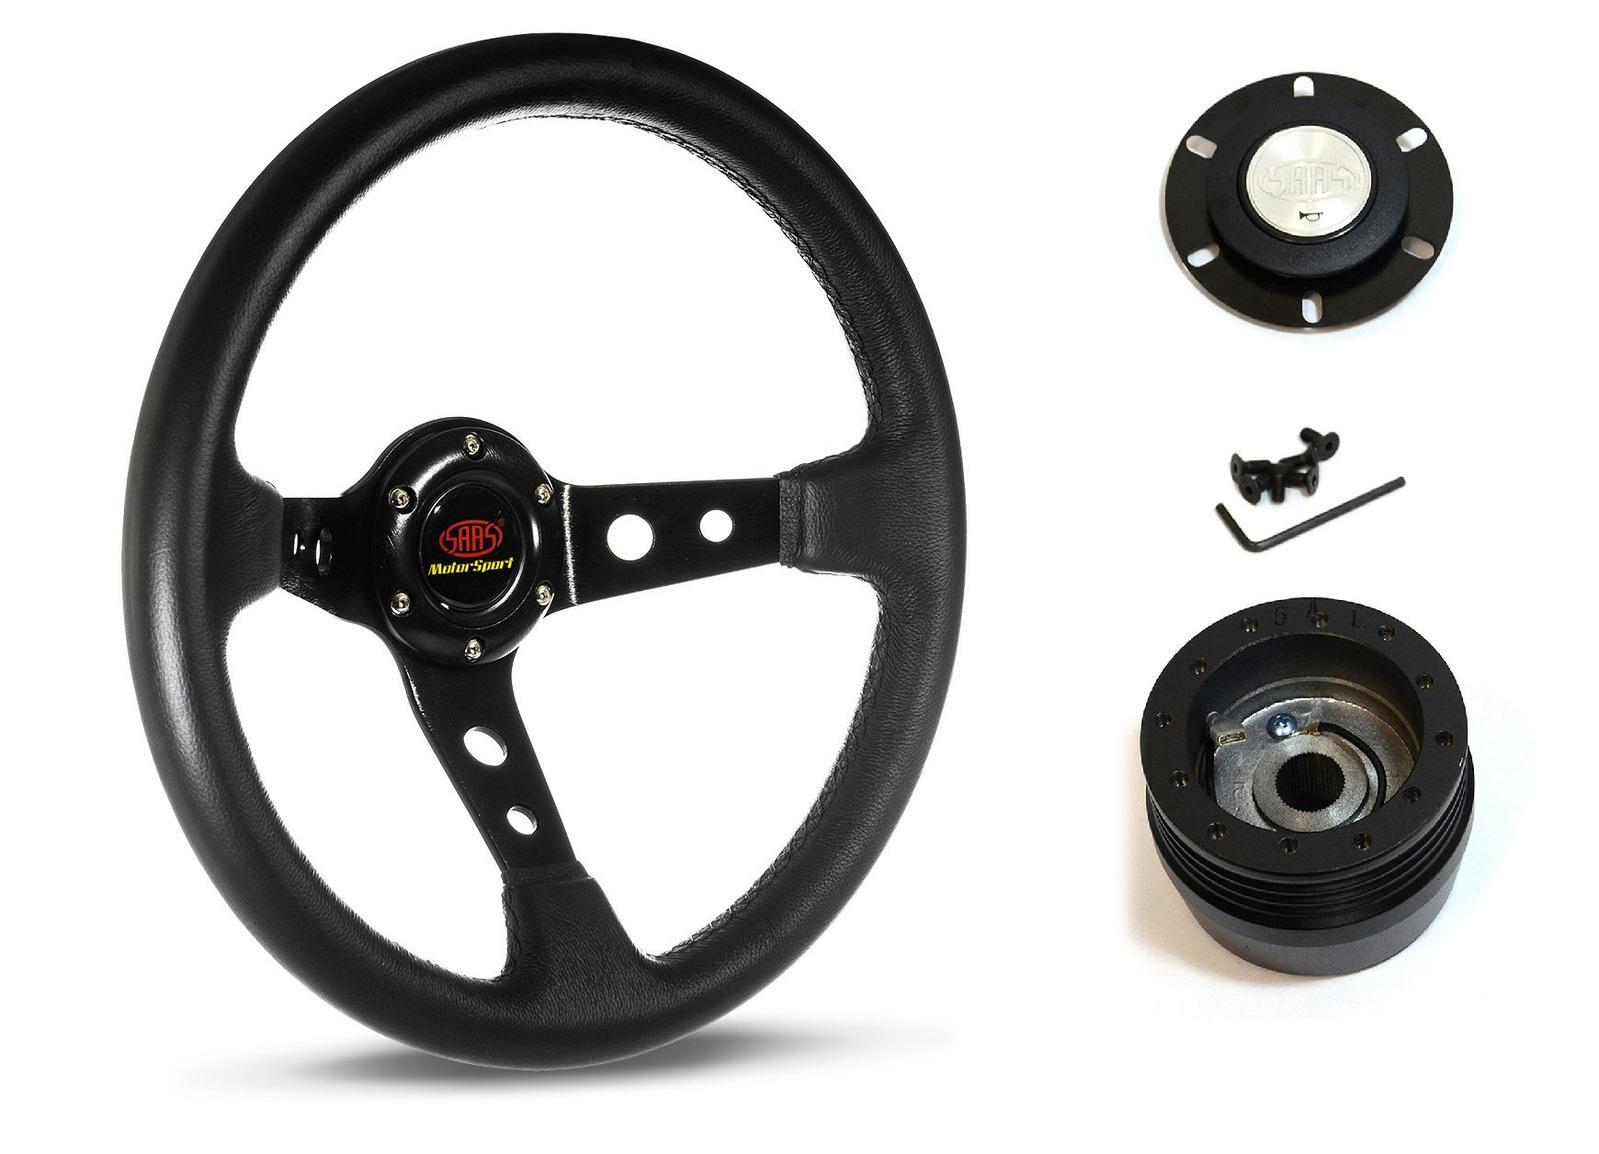 SAAS Steering Wheel Leather 14" ADR GT Deep Dish Black With Holes SWGT3 and SAAS boss kit for Nissan Pathfinder WD21 1986-1995